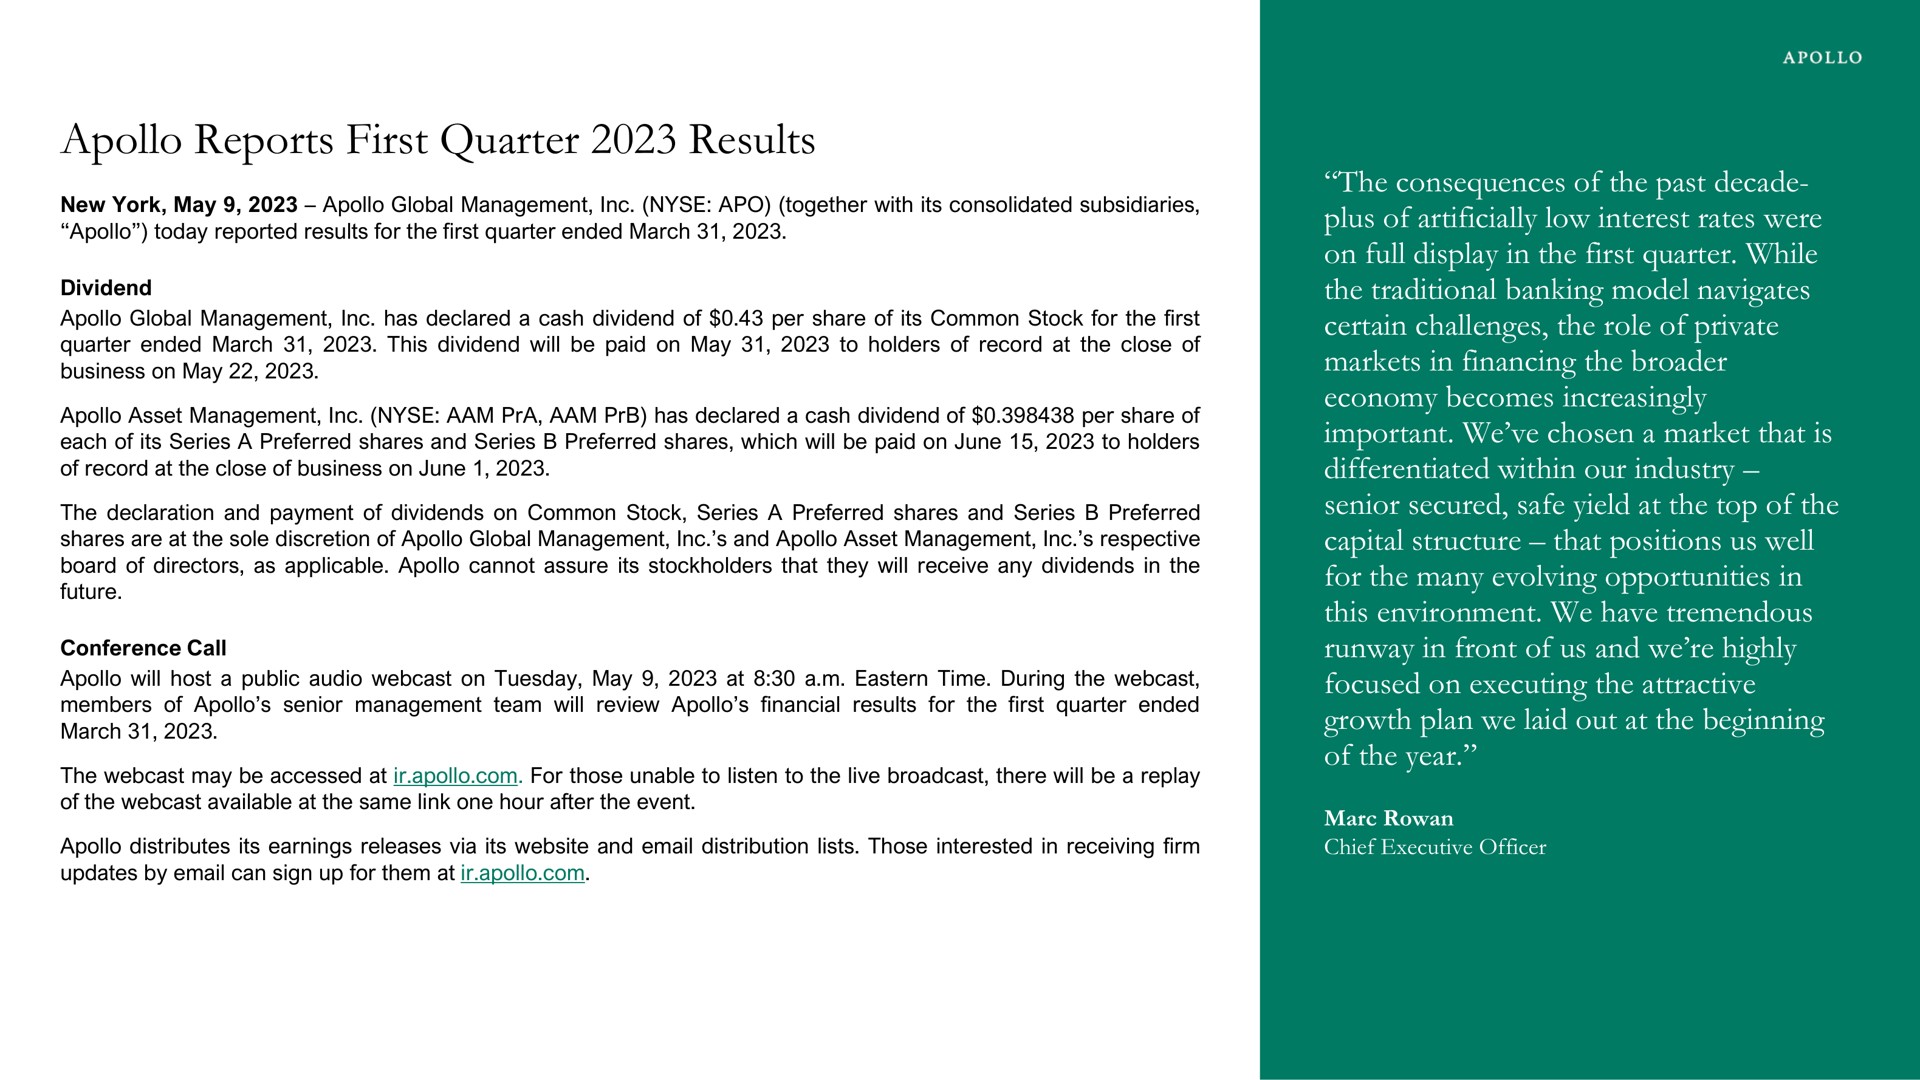 reports first quarter results the consequences of the past decade plus of artificially low interest rates were on full display in the first quarter while the traditional banking model navigates certain challenges the role of private markets in financing the economy becomes increasingly important we chosen a market that is differentiated within our industry senior secured safe yield at the top of the capital structure that positions us well for the many evolving opportunities in this environment we have tremendous runway in front of us and we highly focused on executing the attractive growth plan we laid out at the beginning of the year merle | Apollo Global Management